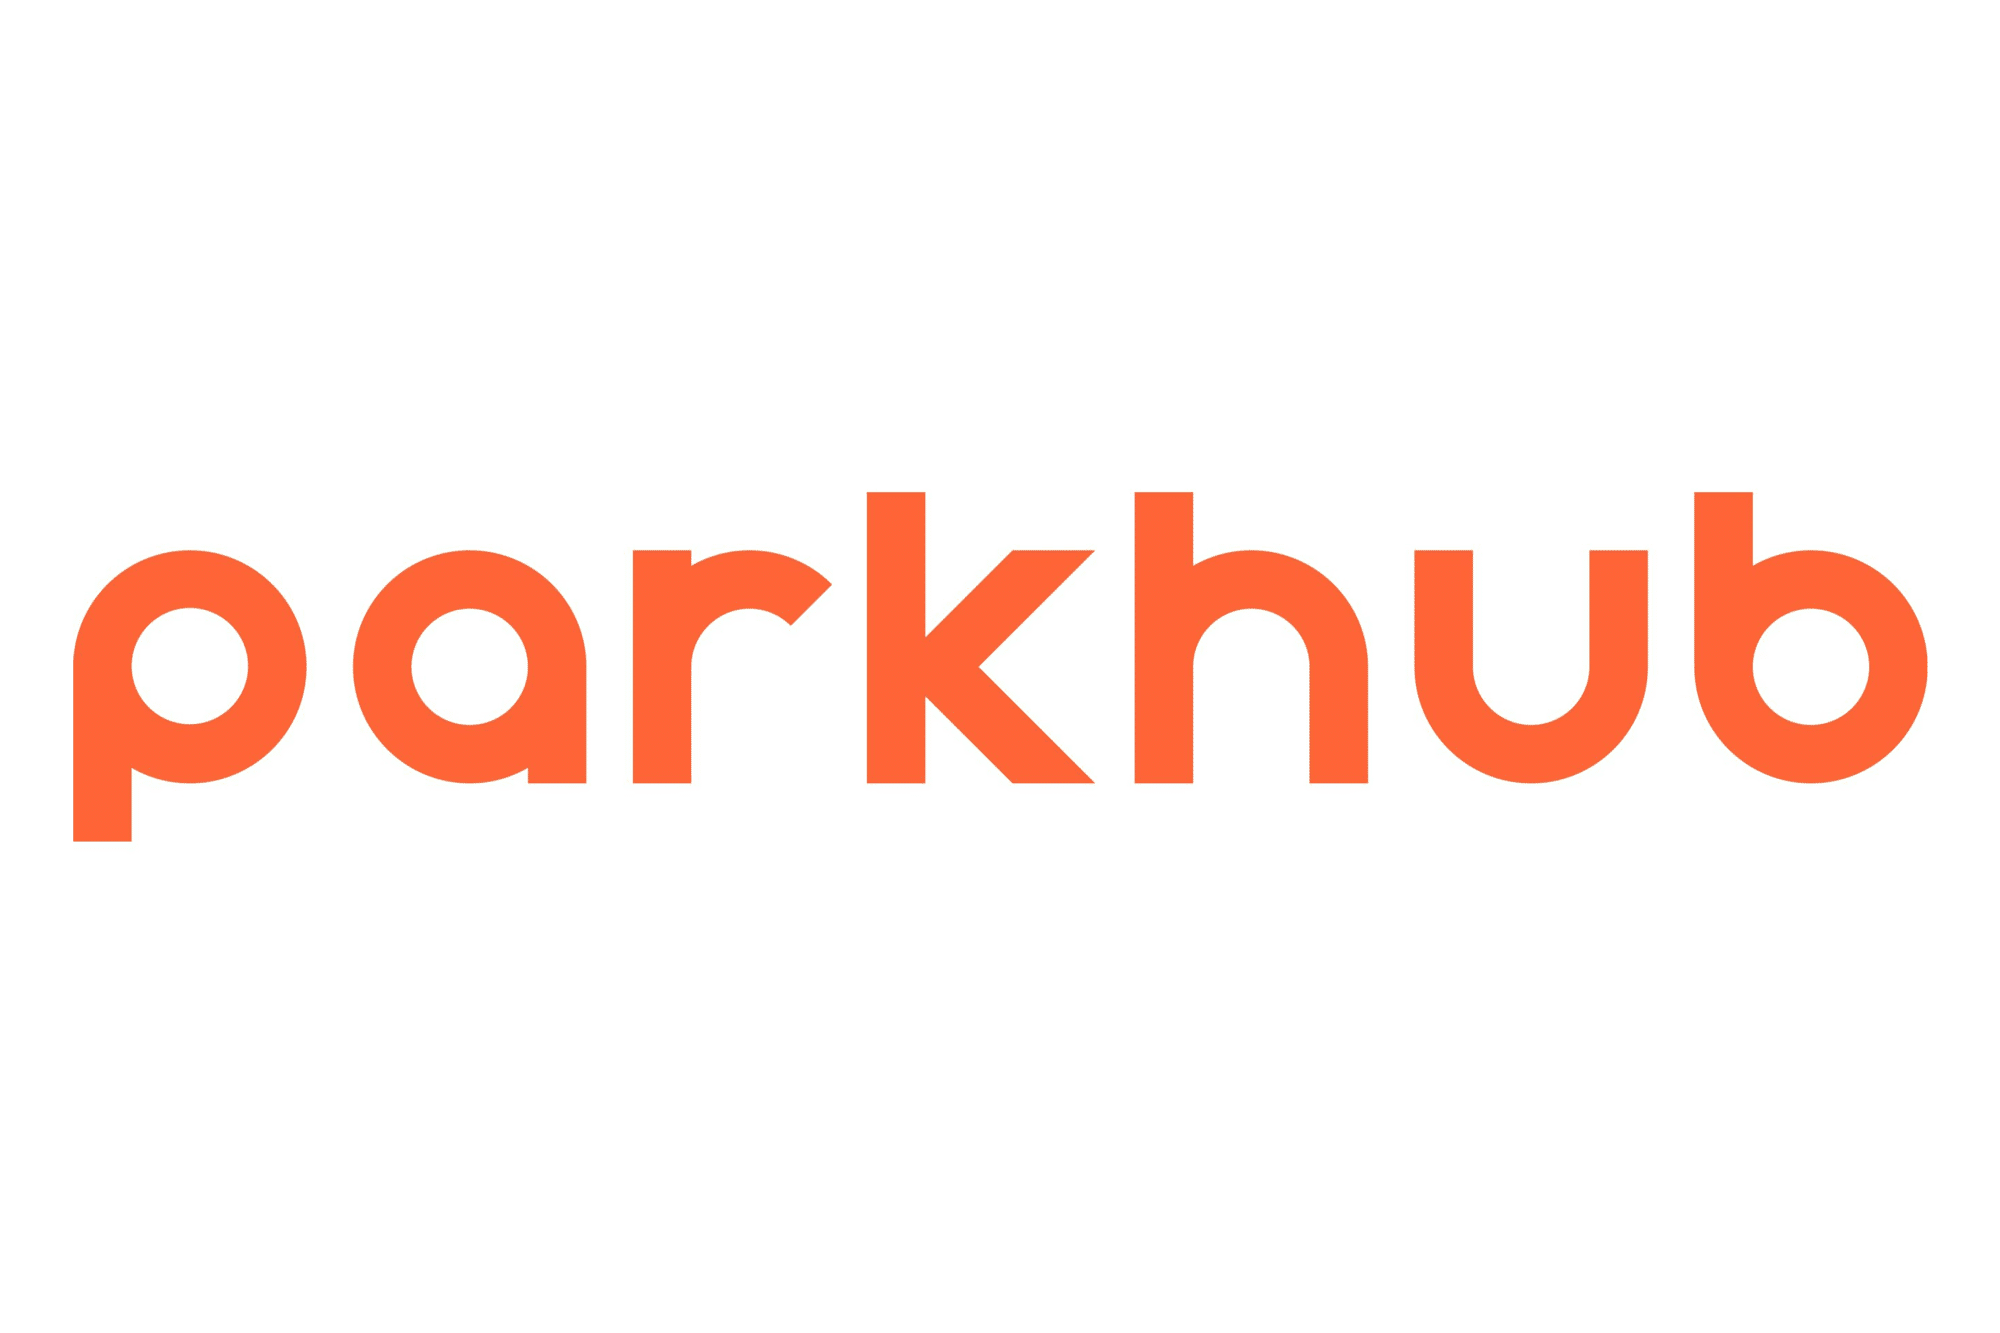 Parkhub logo representing parking and mobility, displayed on a clean white background.